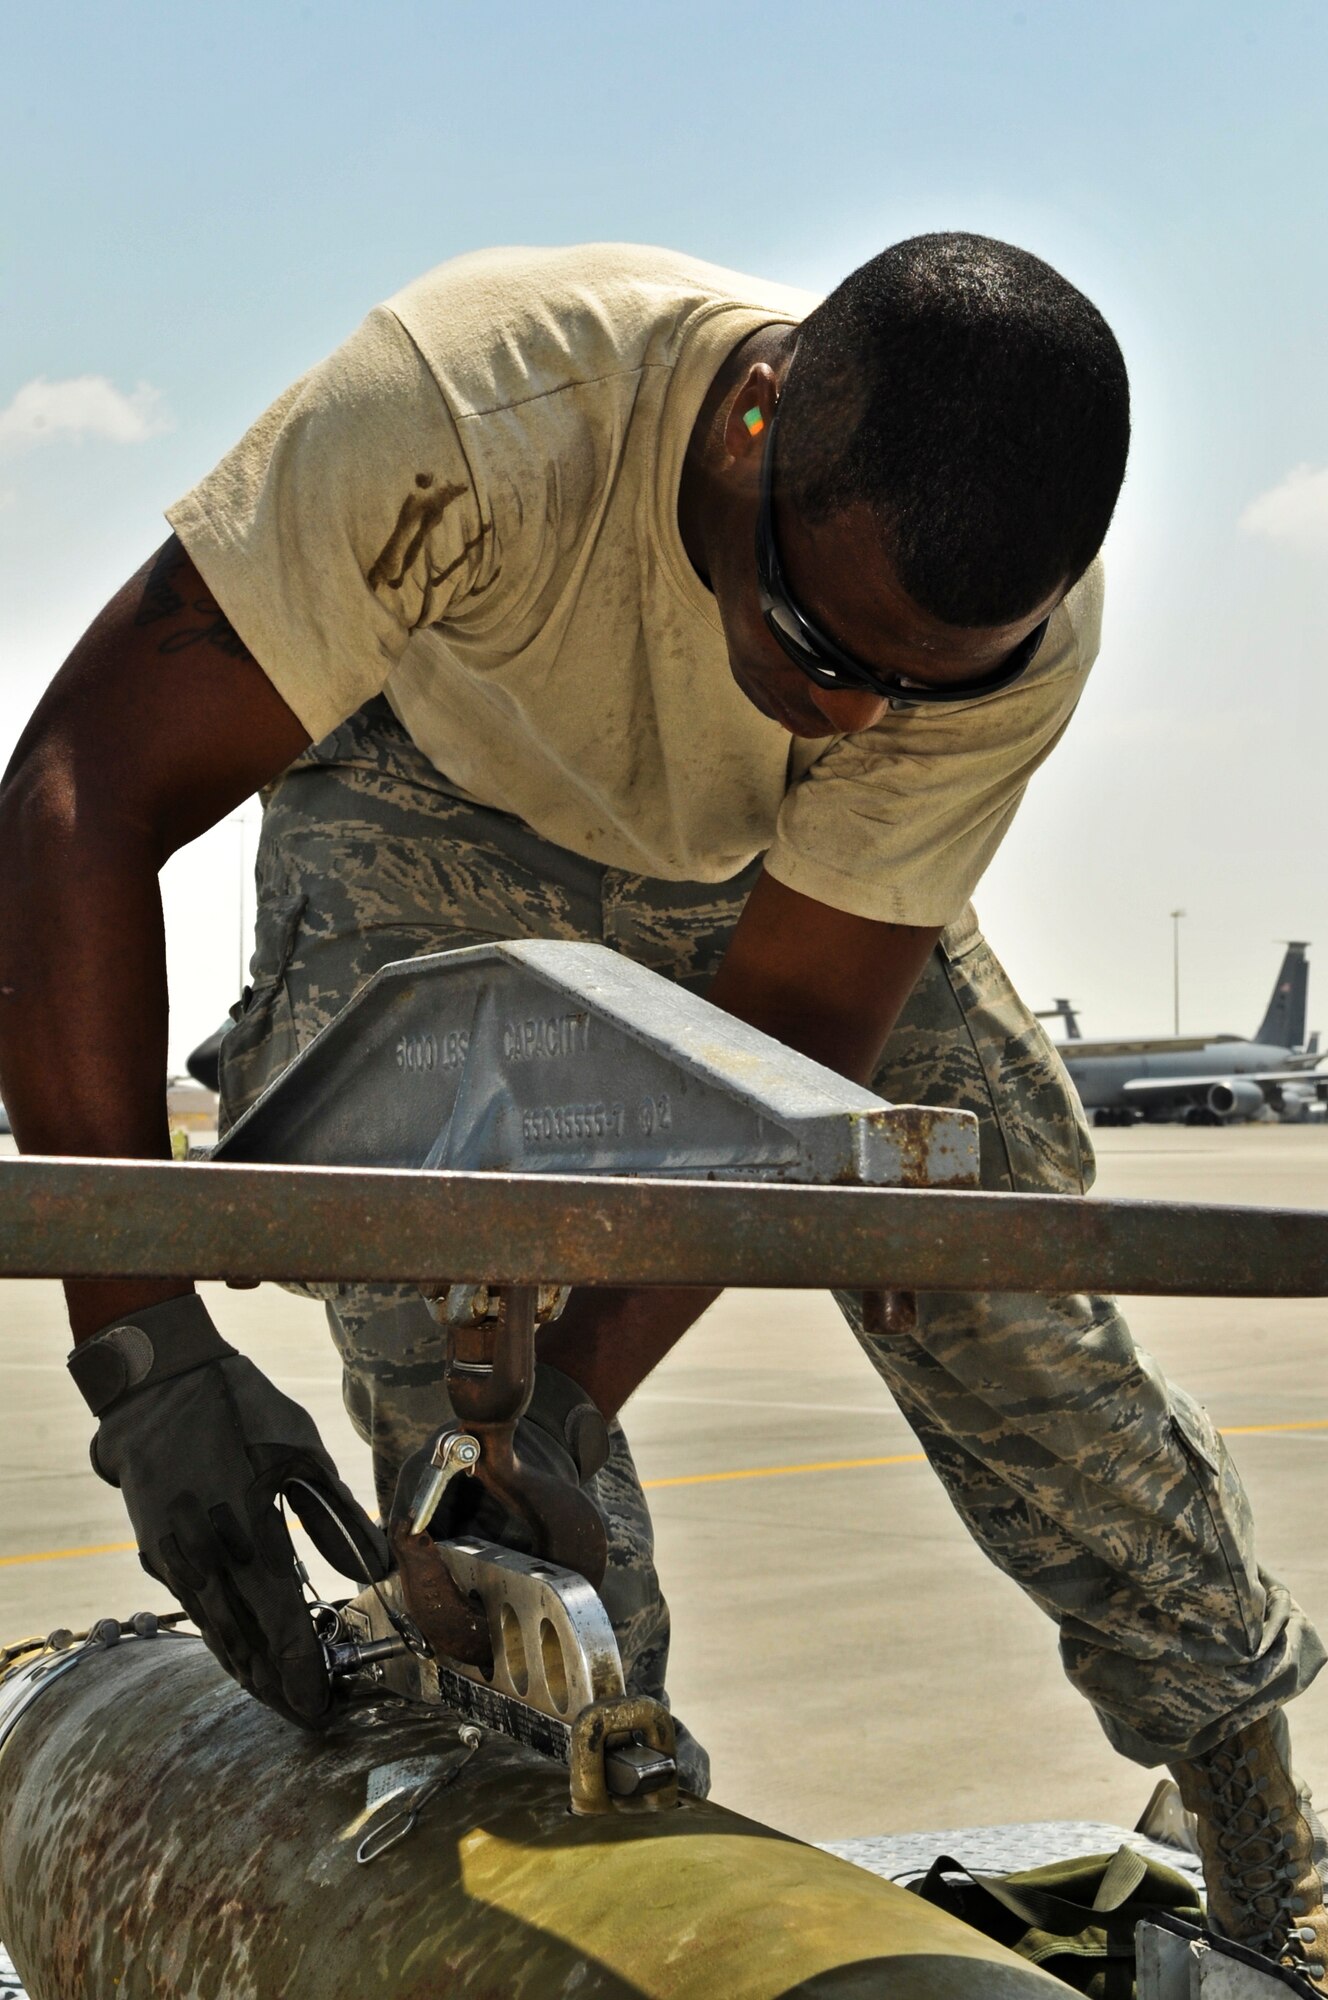 SOUTHWEST ASIA -- Airman 1st Class James Taylor, 37th Aircraft Maintenance Unit weapons load team member, secures a munition to an MJ-1 lift truck, better known as a jammer, Sept. 14, 2011, at an undisclosed location in Southwest Asia. Taylor, a native of Killeen, Texas, is deployed from Ellsworth Air Force Base, S. D. (U.S. Air Force photo/Senior Airman Paul Labbe)